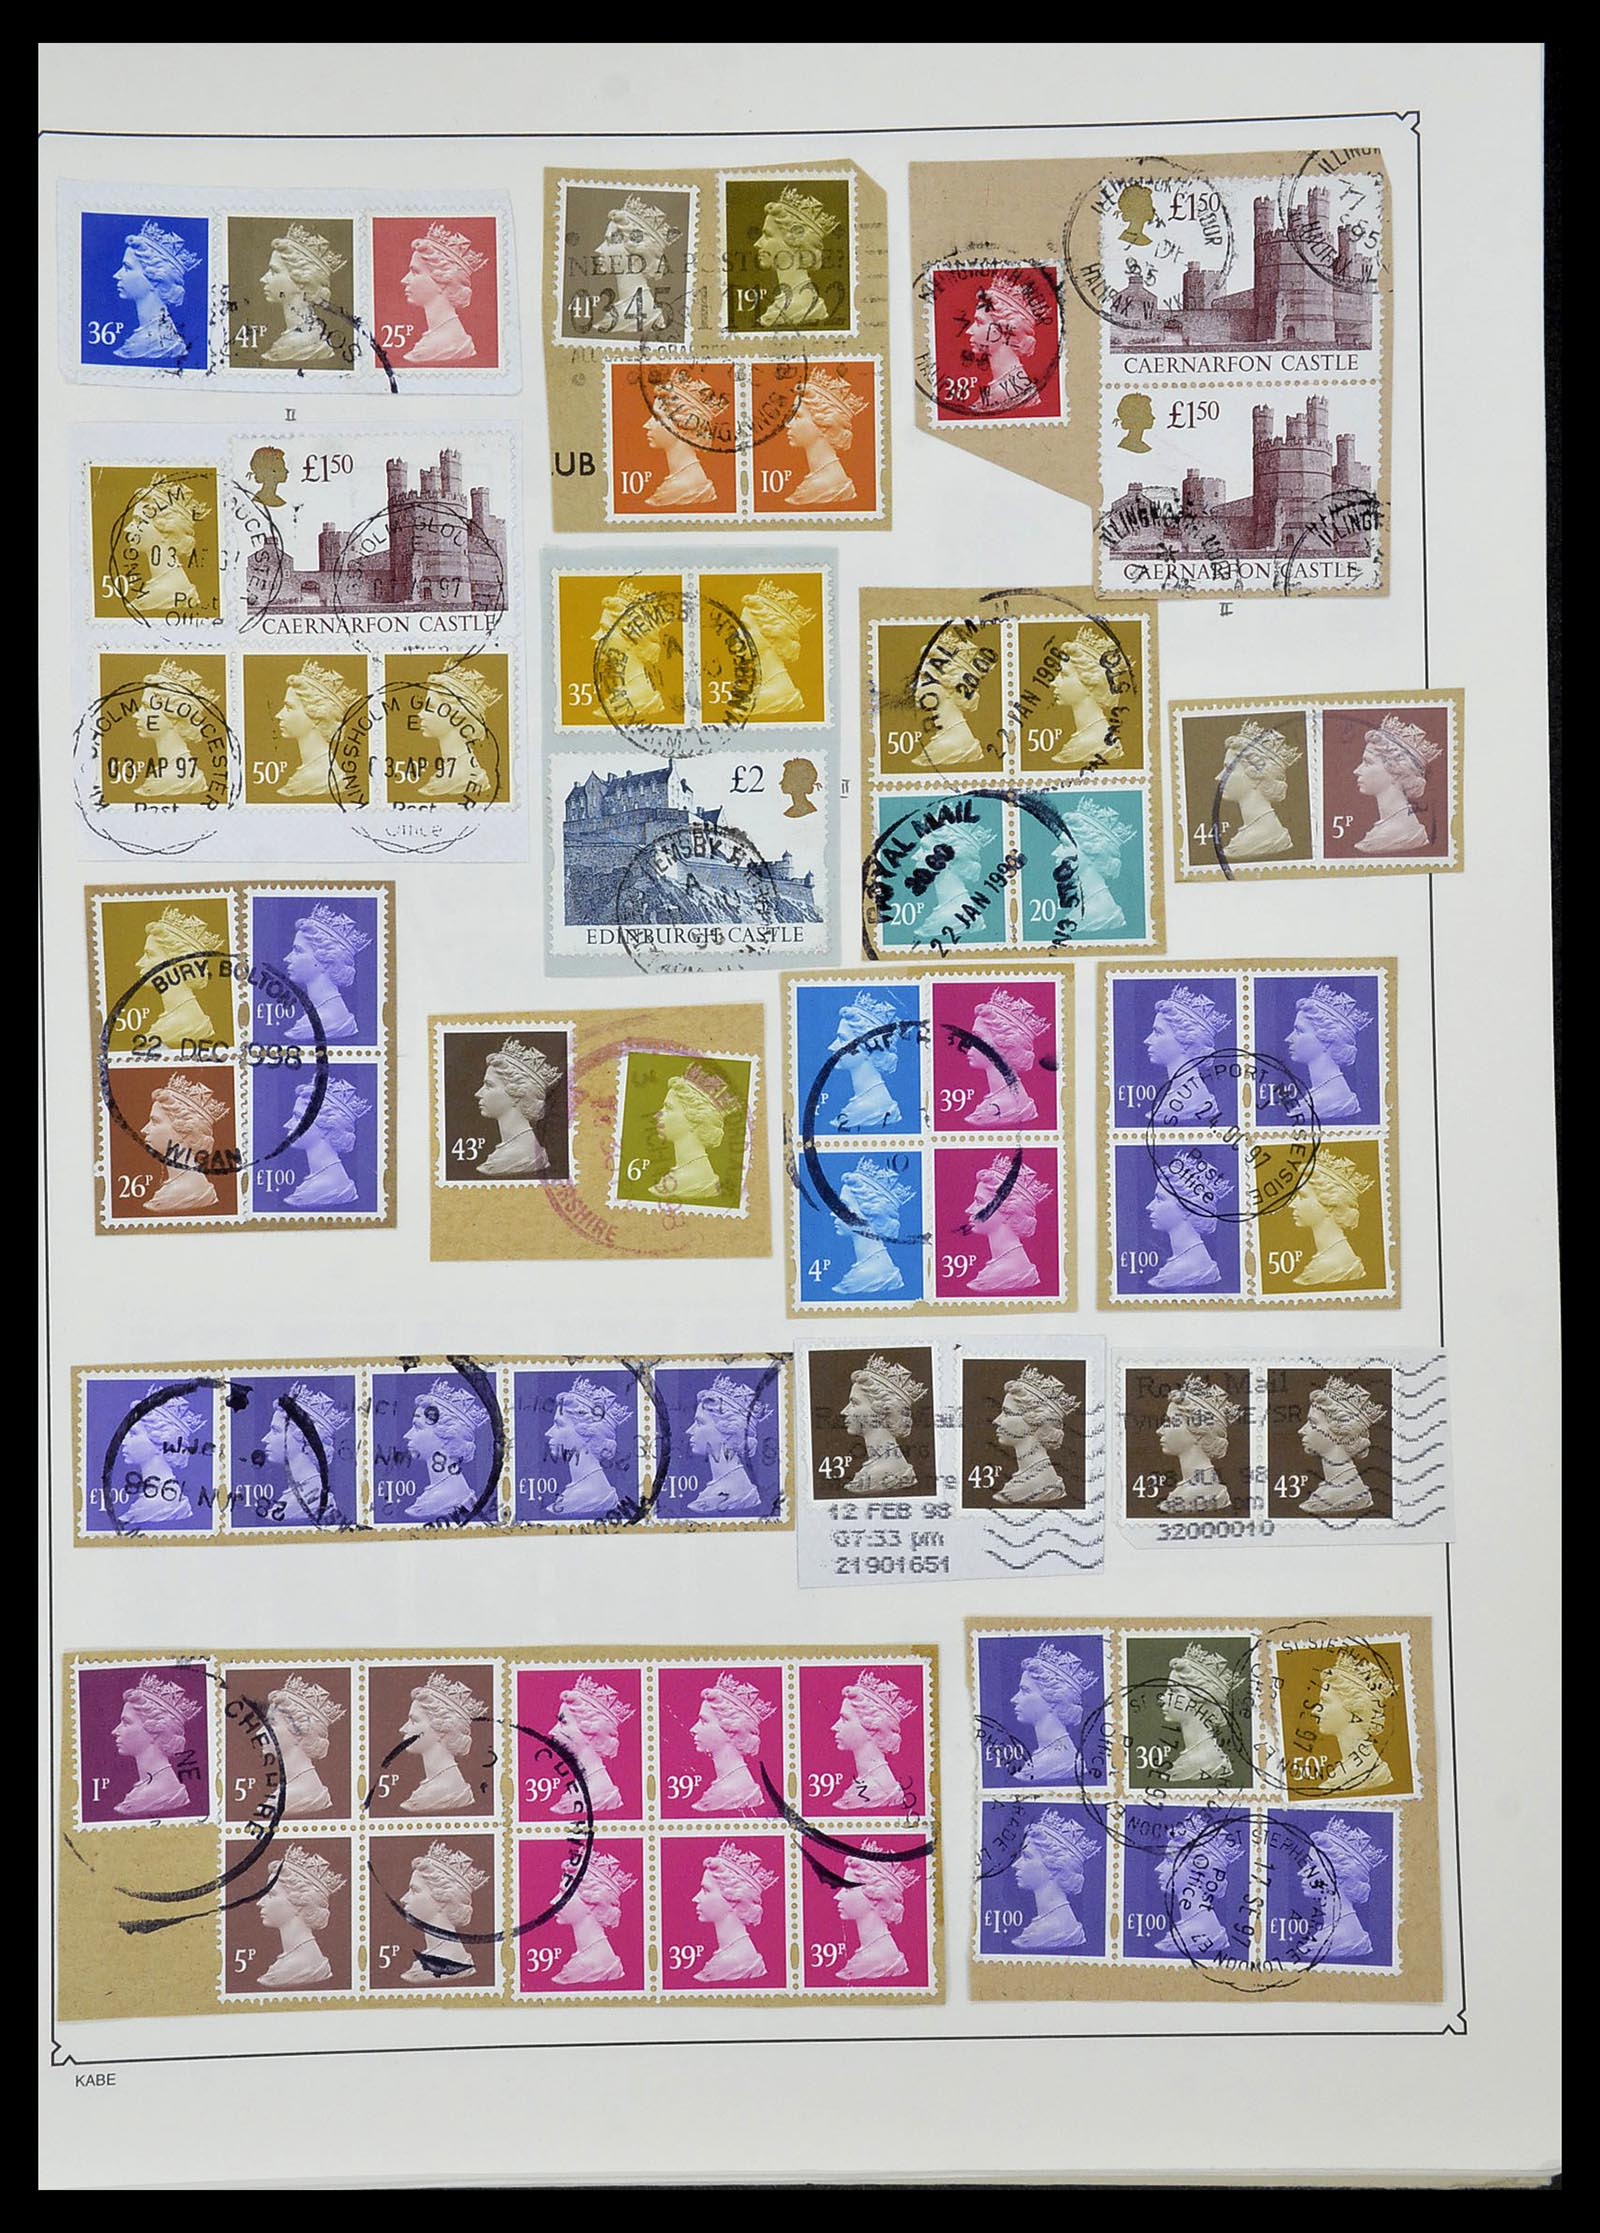 34221 178 - Stamp collection 34221 Great Britain Machins/castles 1971-2005.